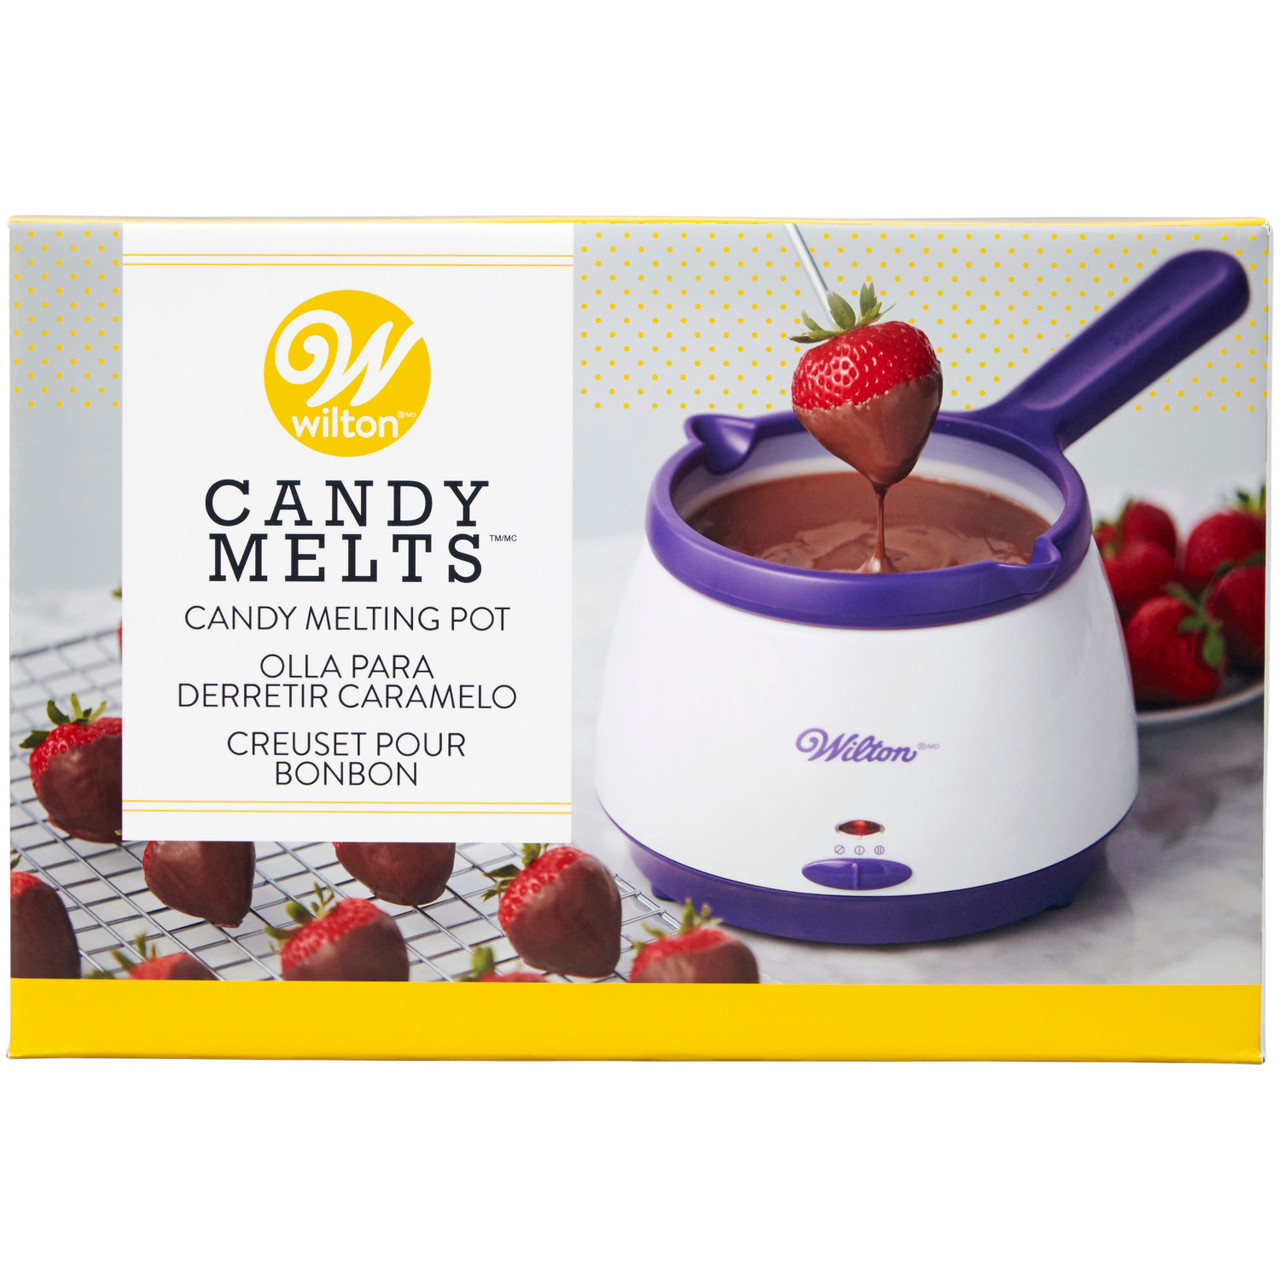 Candy Melts Candy And Chocolate Melting Pot - Wilton